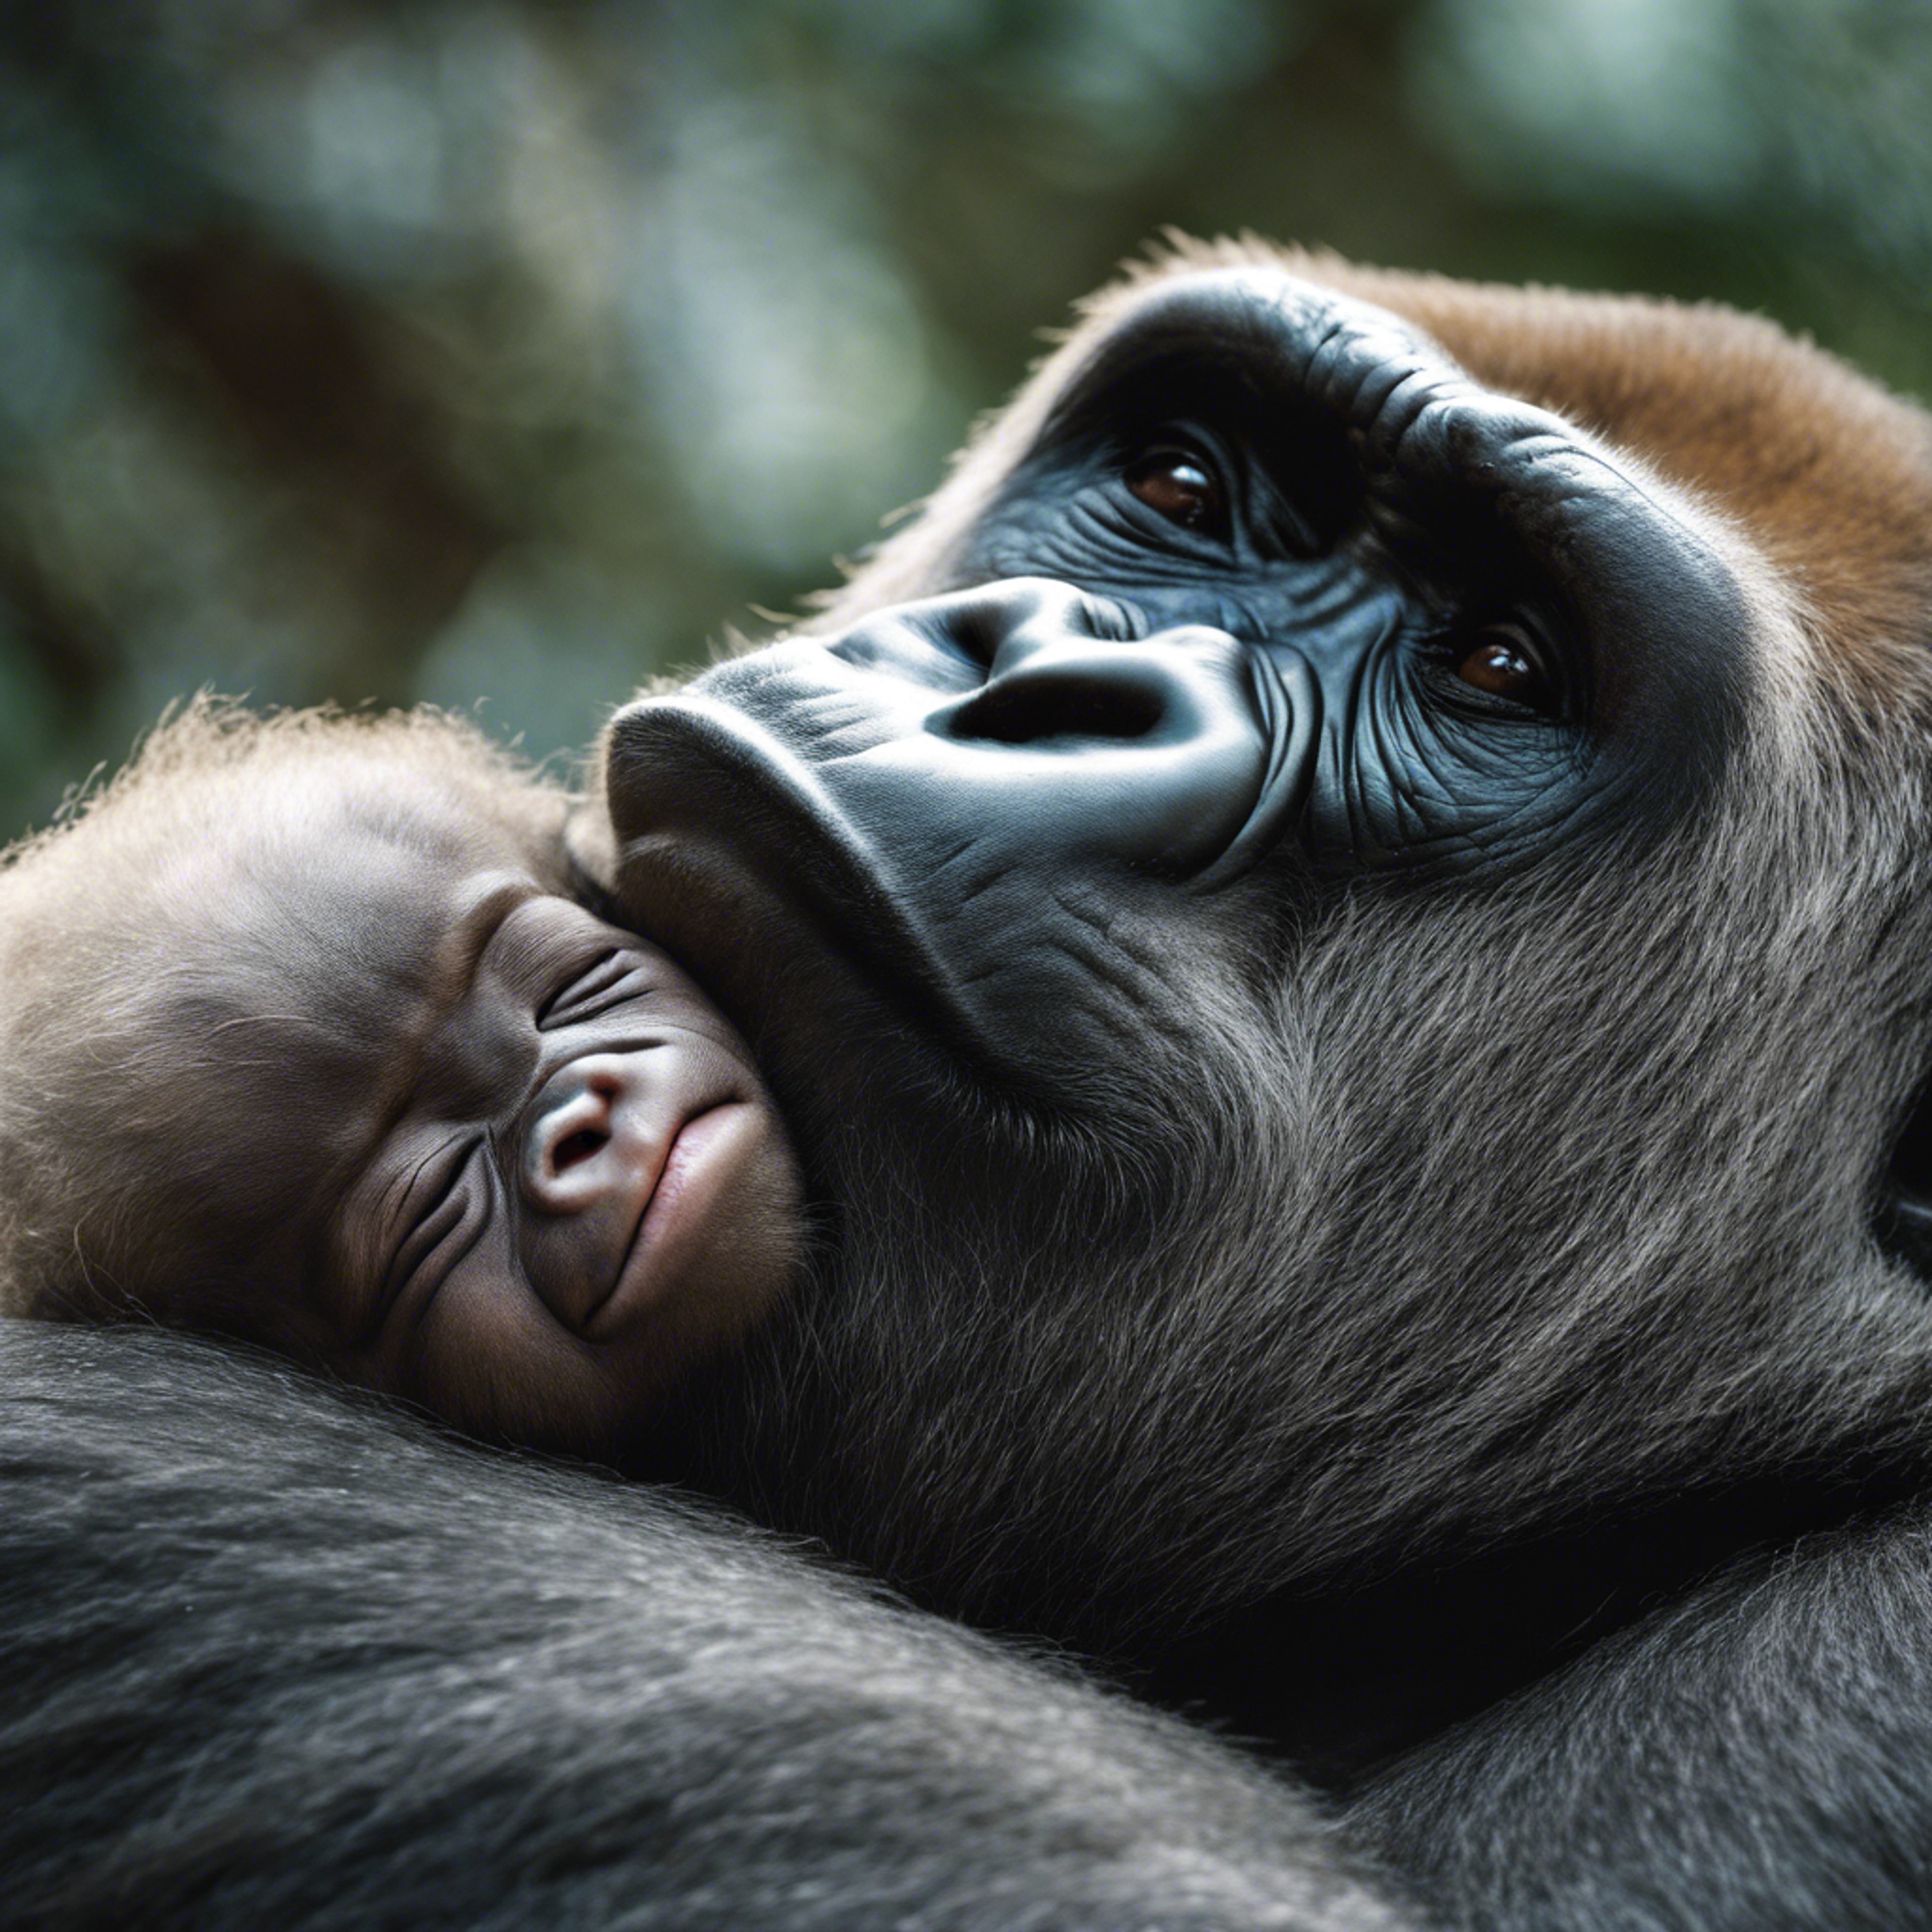 A close-up, emotional study of a gorilla mother's face as she cradles her sleeping newborn. Ფონი[516e0f2ed6254482ad03]